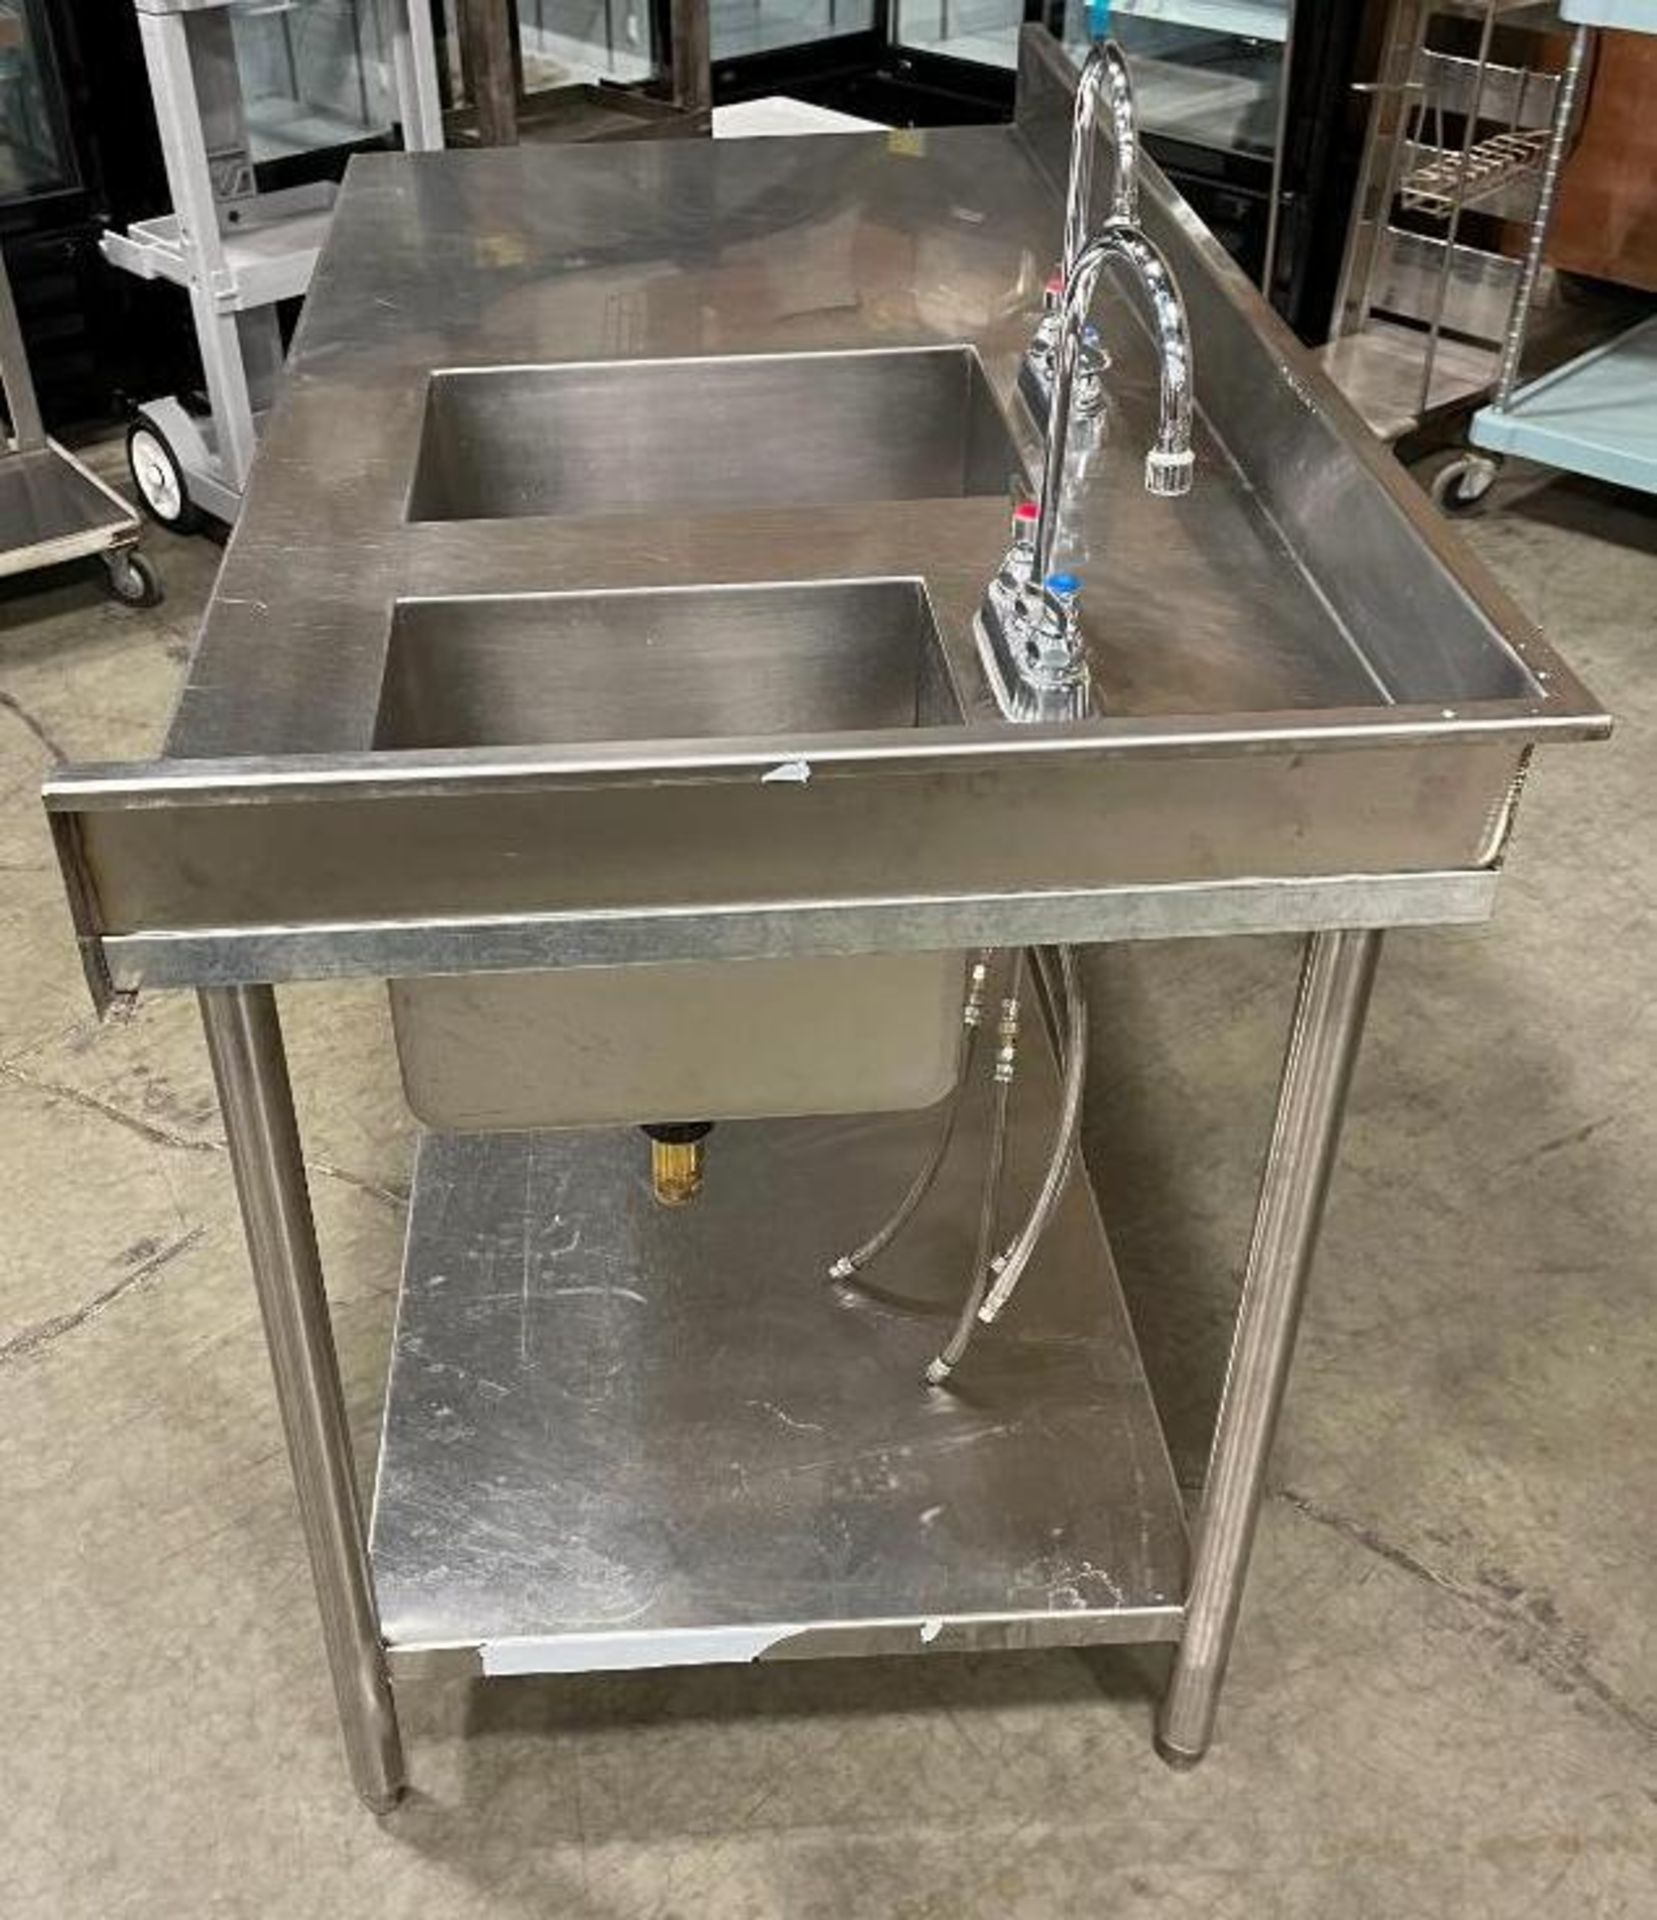 60" STAINLESS STEEL WORK TABLE WITH TWO SINK WELLS & TAPS - Image 3 of 6